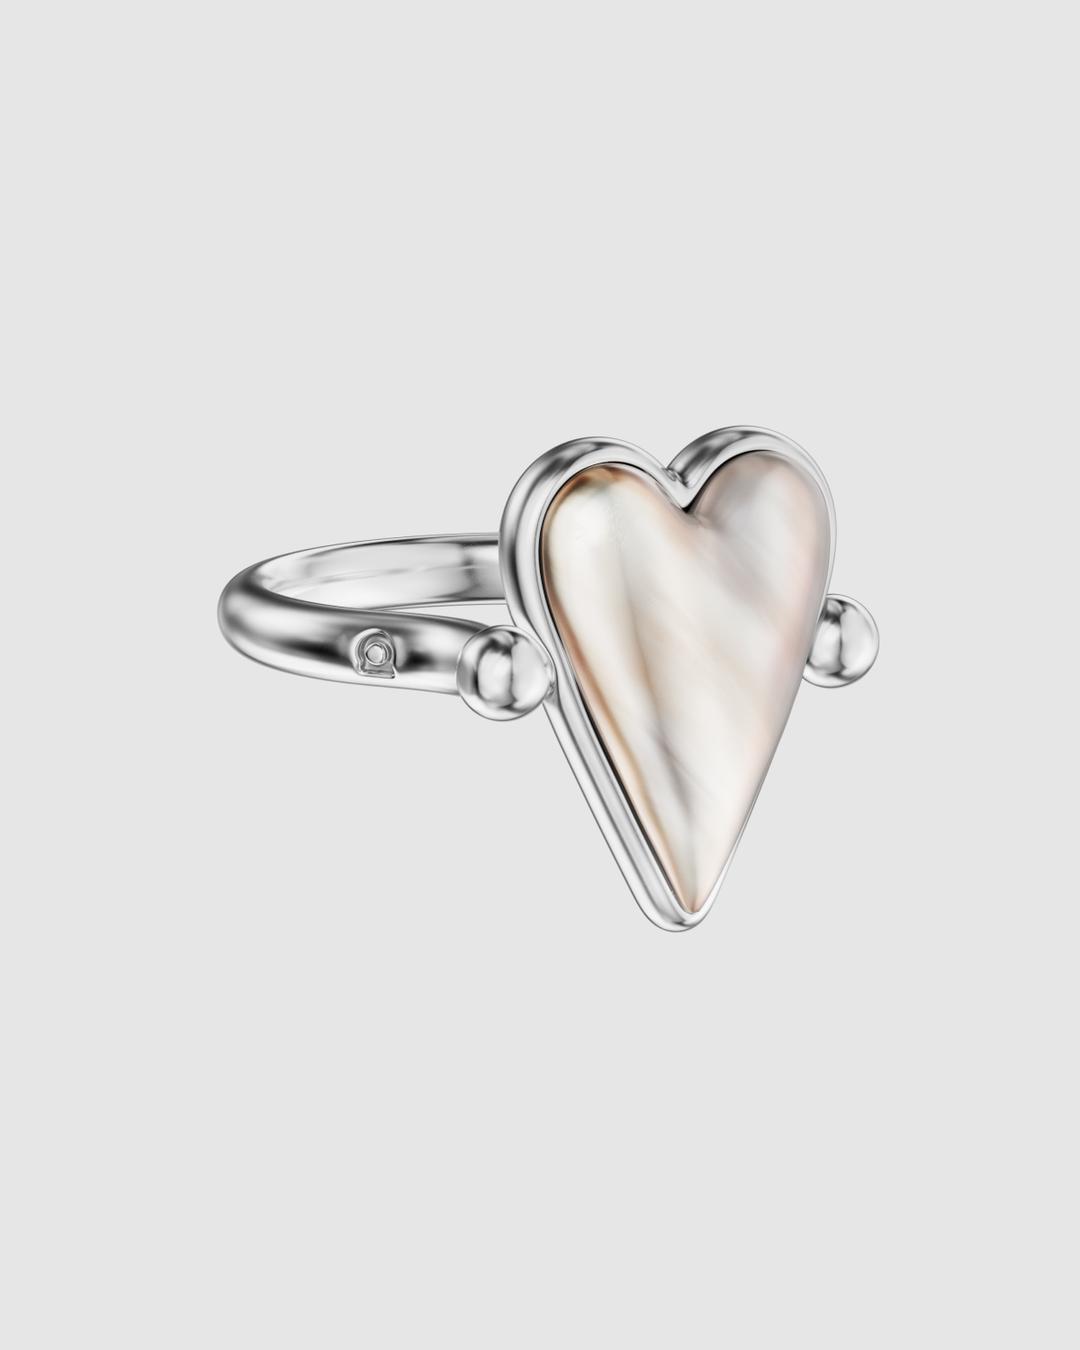 Yes-No Heart Lock Earring With Gold Plating – AVGVST Jewelry